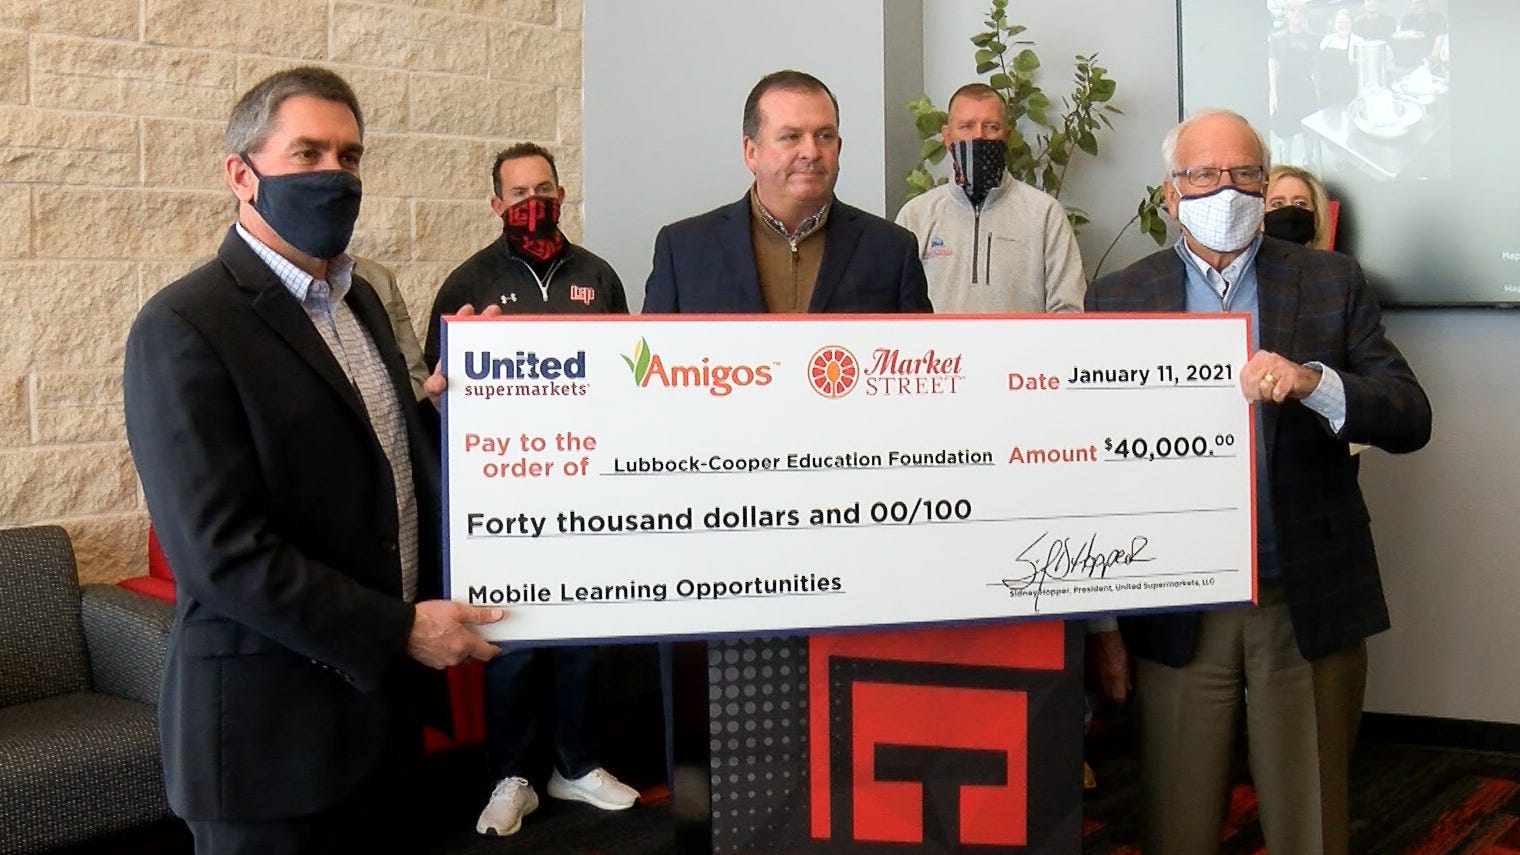 United Supermarkets donation boosts Lubbock-Cooper's mobile learning efforts